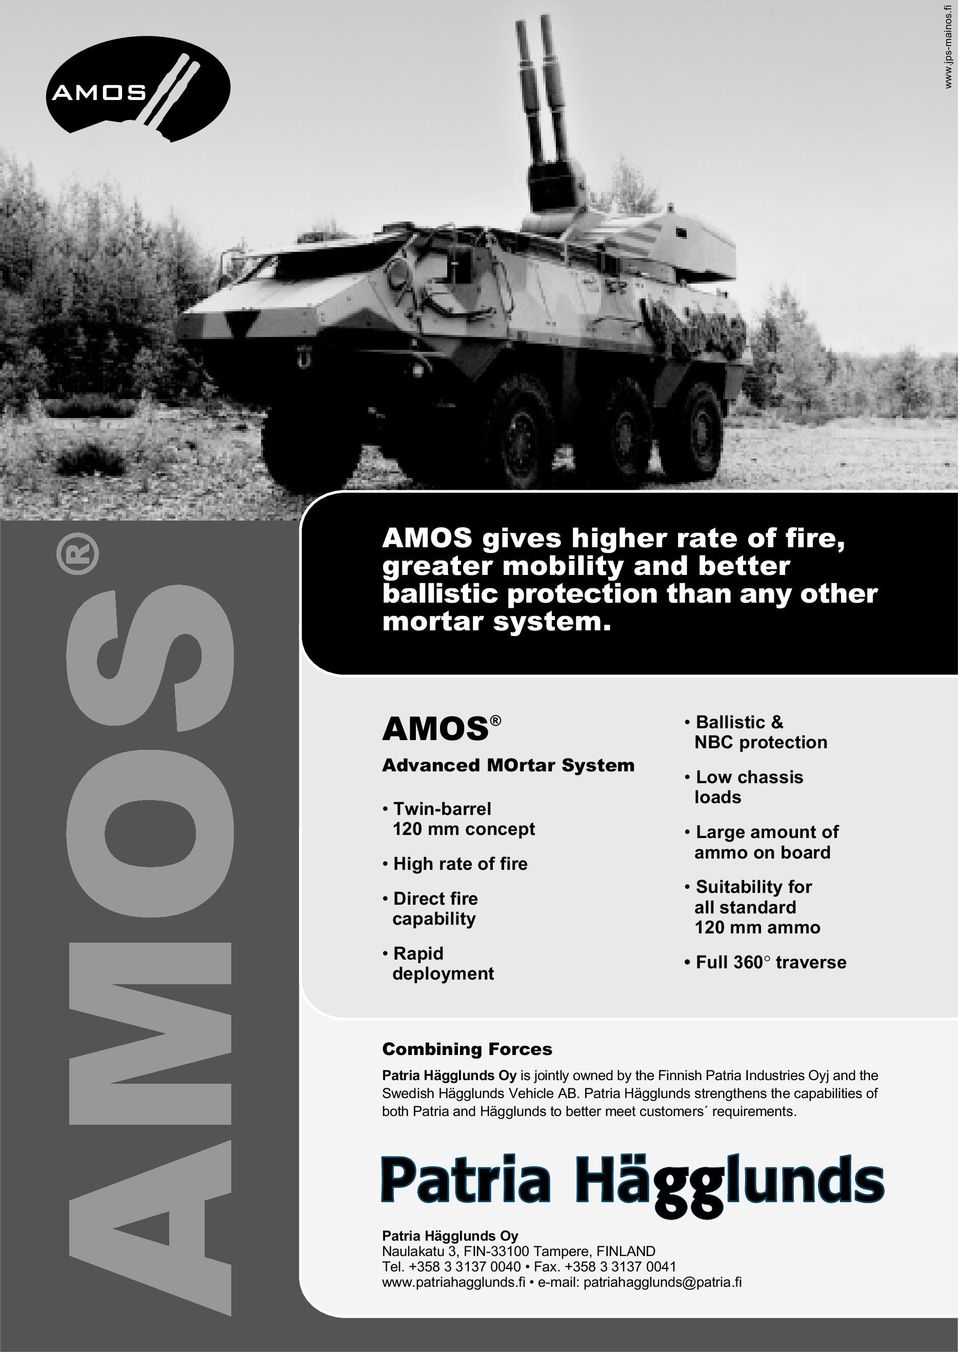 Suitability for all standard 120 mm ammo Full 360 traverse Combining Forces Patria Hägglunds Oy is jointly owned by the Finnish Patria Industries Oyj and the Swedish Hägglunds Vehicle AB.